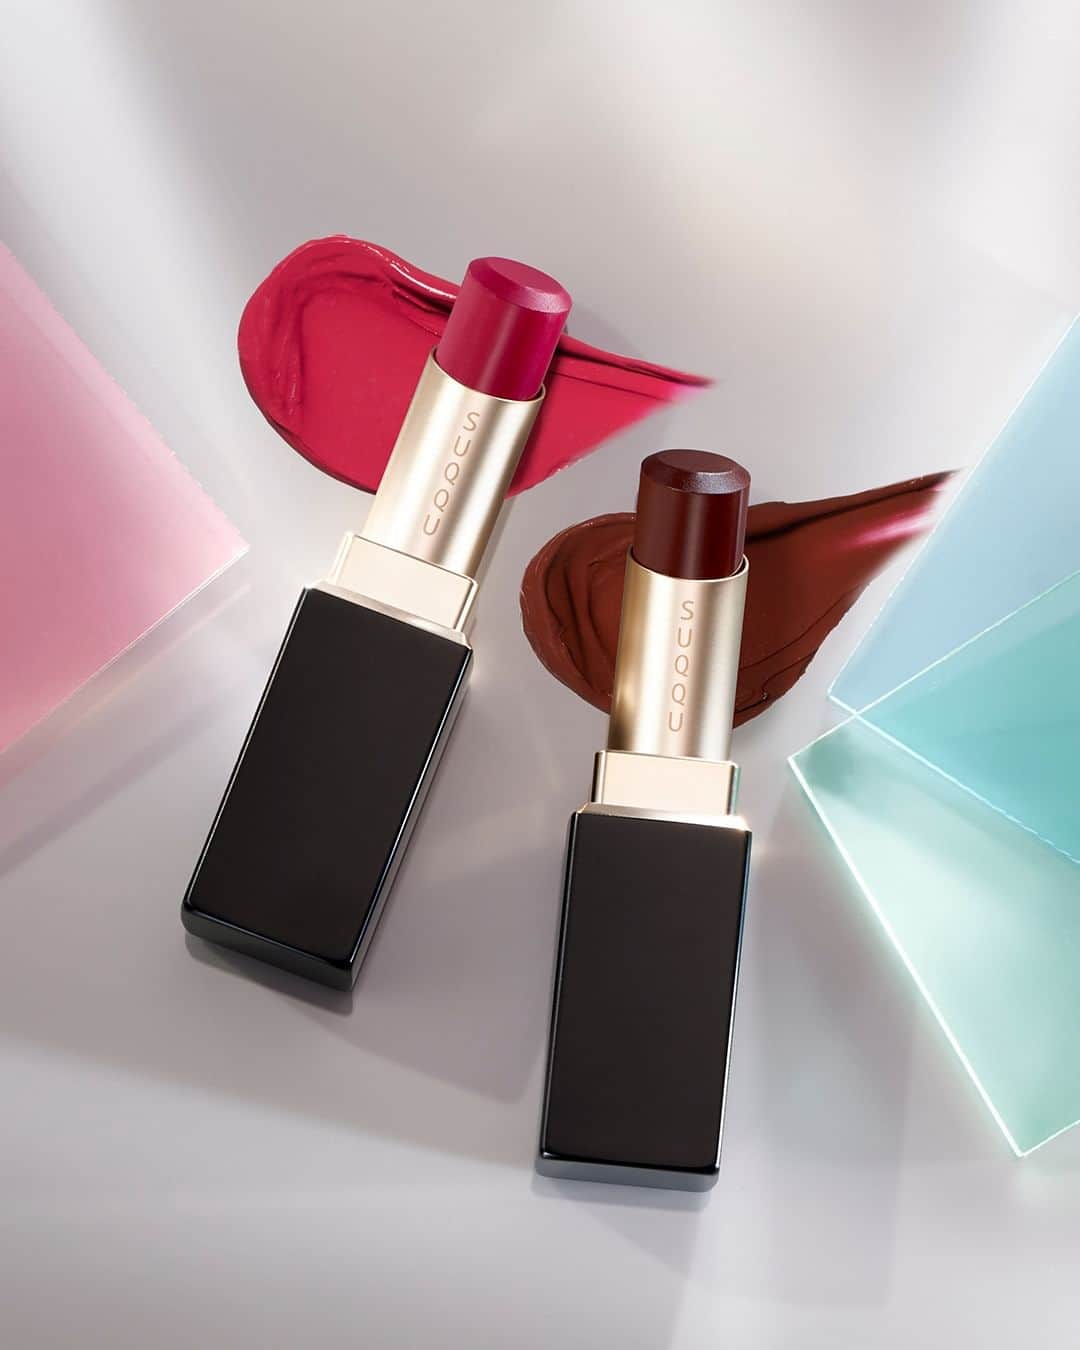 SUQQU公式Instgramアカウントのインスタグラム：「A single application is all you need to create a shimmer that is the star of the show. Two colors that boldly and powerfully adorn the lips.  VIBRANT RICH LIPSTICK 118 -HANANUSUMI [Limited color]: An eye-catching fuchsia pink with a prominent presence. 119 -KOIKAGE [Limited color]: An edgy, grown-up dark brown is a rich color you will want to choose in winter.  ひと塗りで主役級の華やかさ。力強く、大胆に唇を彩る2色。  バイブラント リッチ リップスティック 118 花盗 -HANANUSUMI [限定色]: 主役級の存在感を放つ、目が覚めるようなフューシャピンク。 119 濃影 -KOIKAGE [限定色]: エッジを効かせた大人っぽいダークブラウンは、冬に選びたくなる濃厚カラー。  #SUQQU #スック #jbeauty #cosmetics #SUQQU20th #SUQQUcolormakeup #wintercolorcollection #newproducts #holiday #limited #バイブラントリッチリップスティック」